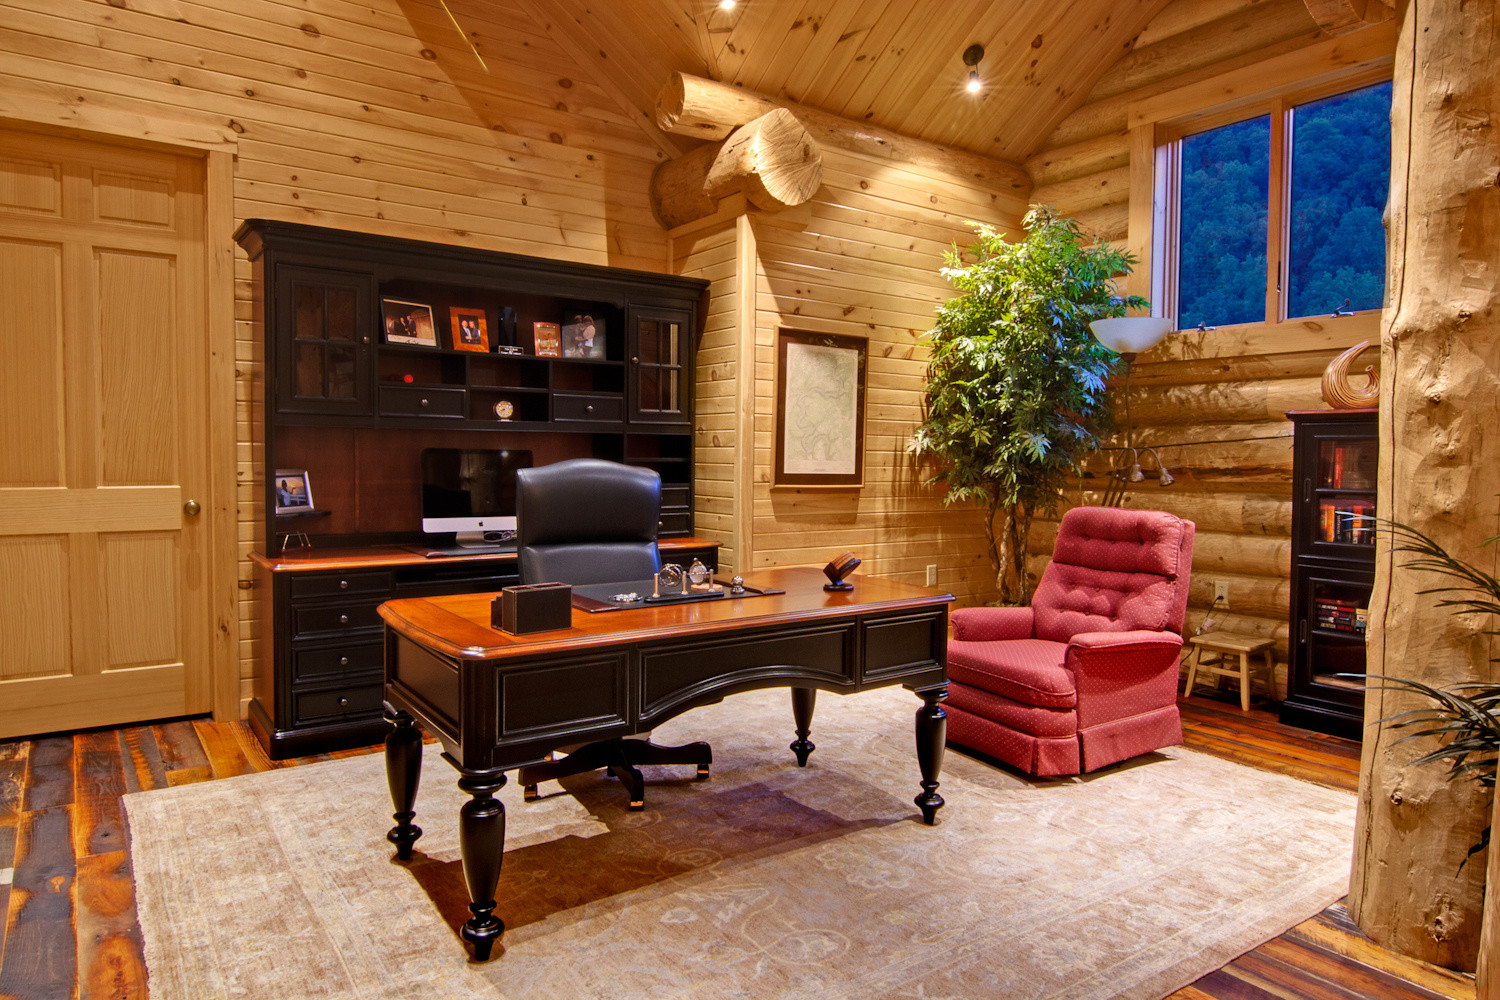 Designing Your Log or Timber Home to Include a Home Office